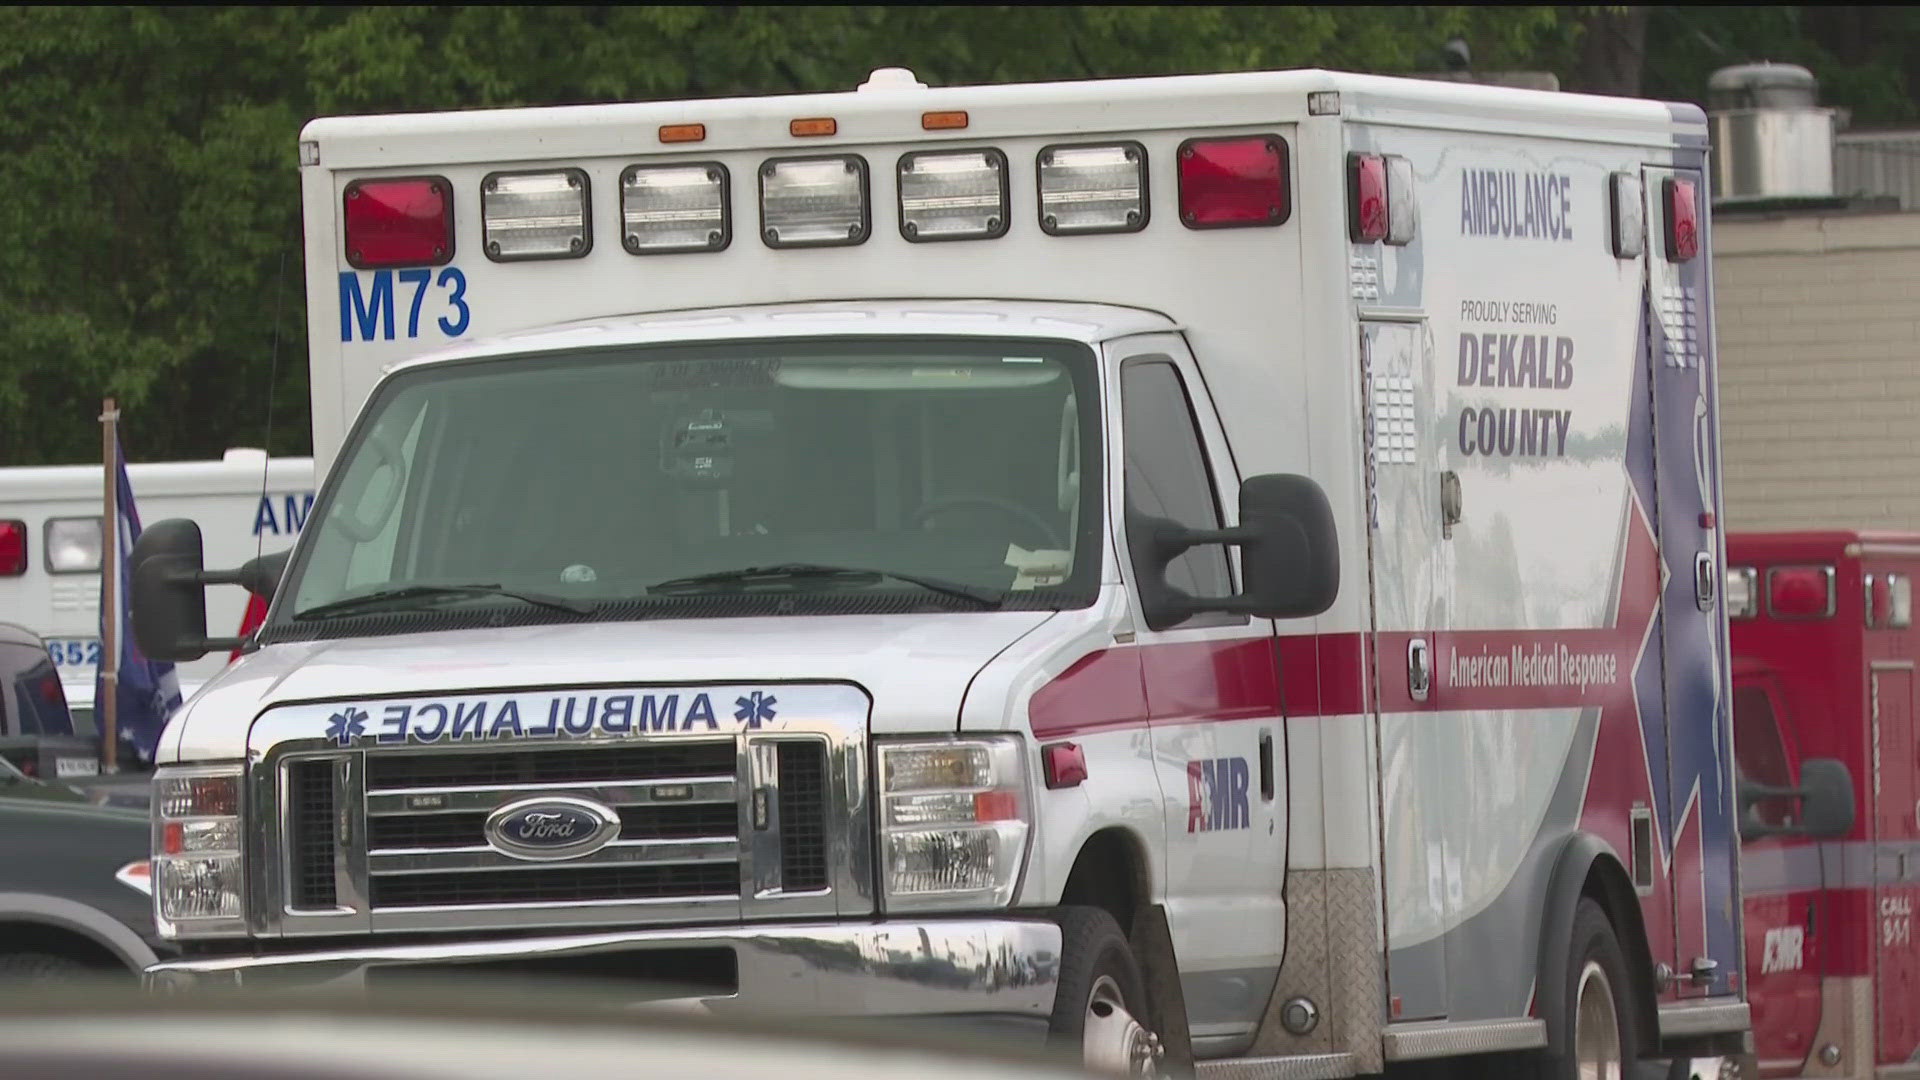 The city has heard several reports about long wait times for ambulances for months